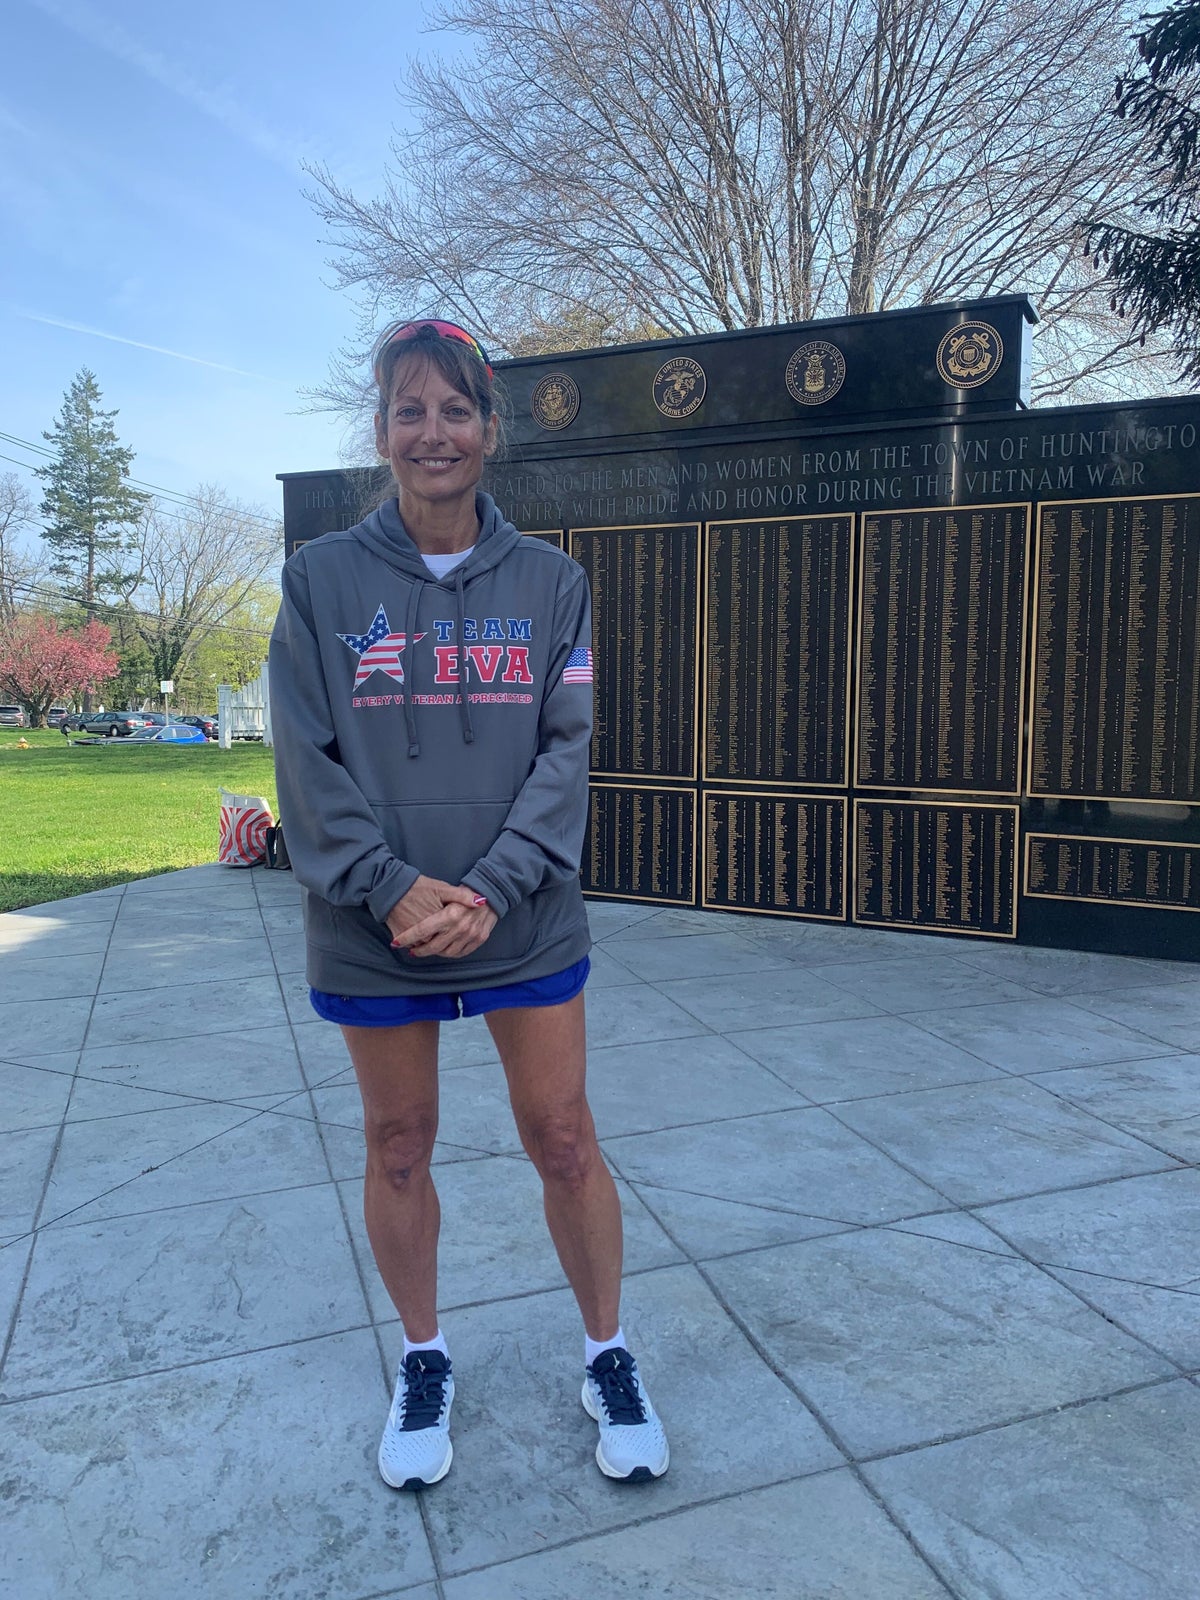 Eva Casale, of Glen Cove, kicked off her goal of seven marathons in seven days Sunday at Huntington Town Hall.